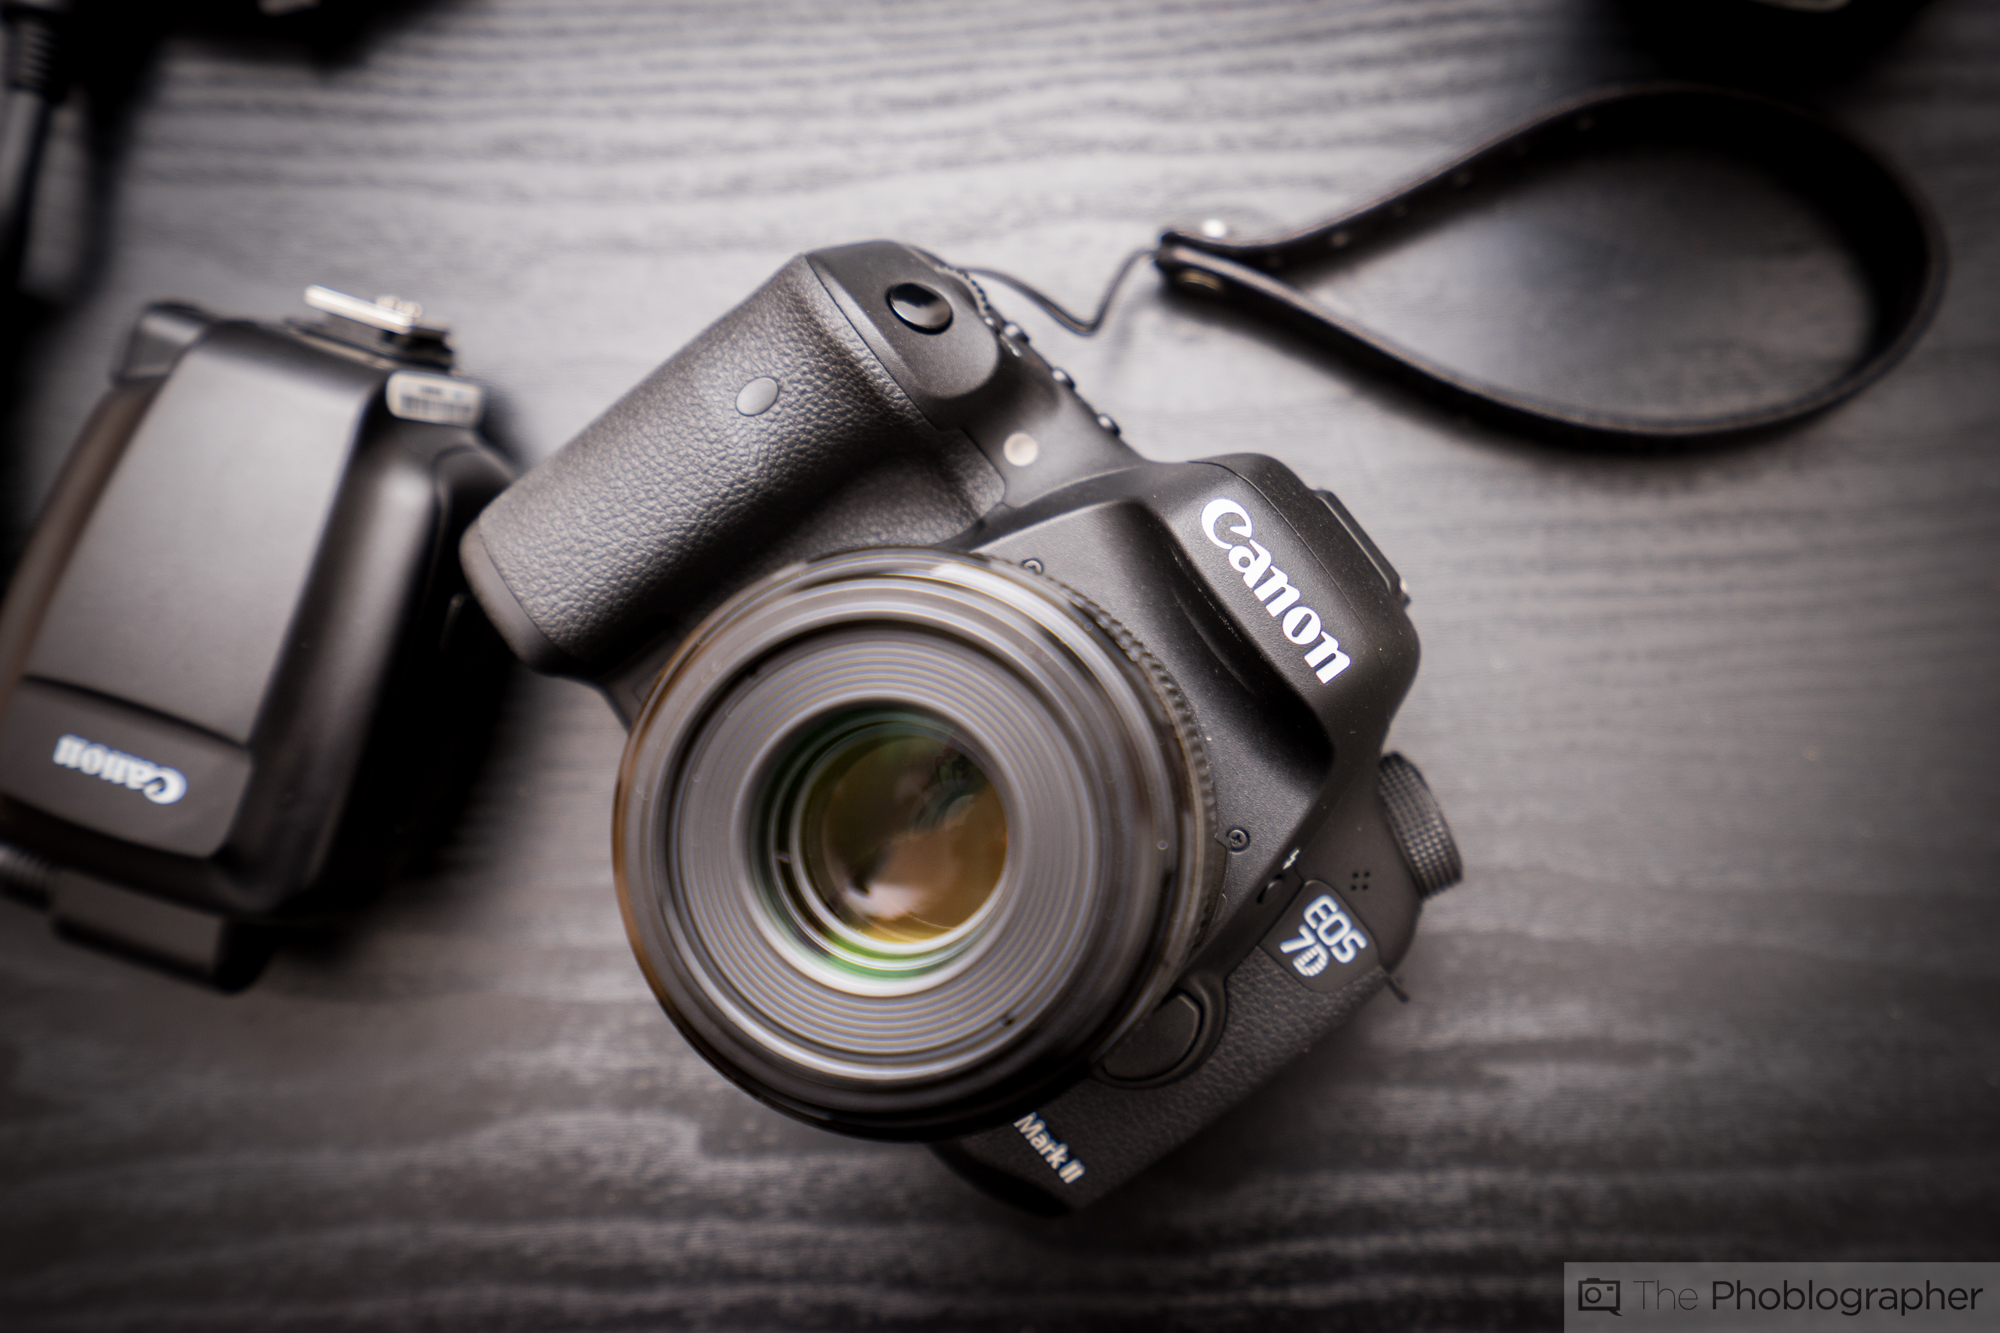 Do We Really Need More New APS-C DSLR Cameras?